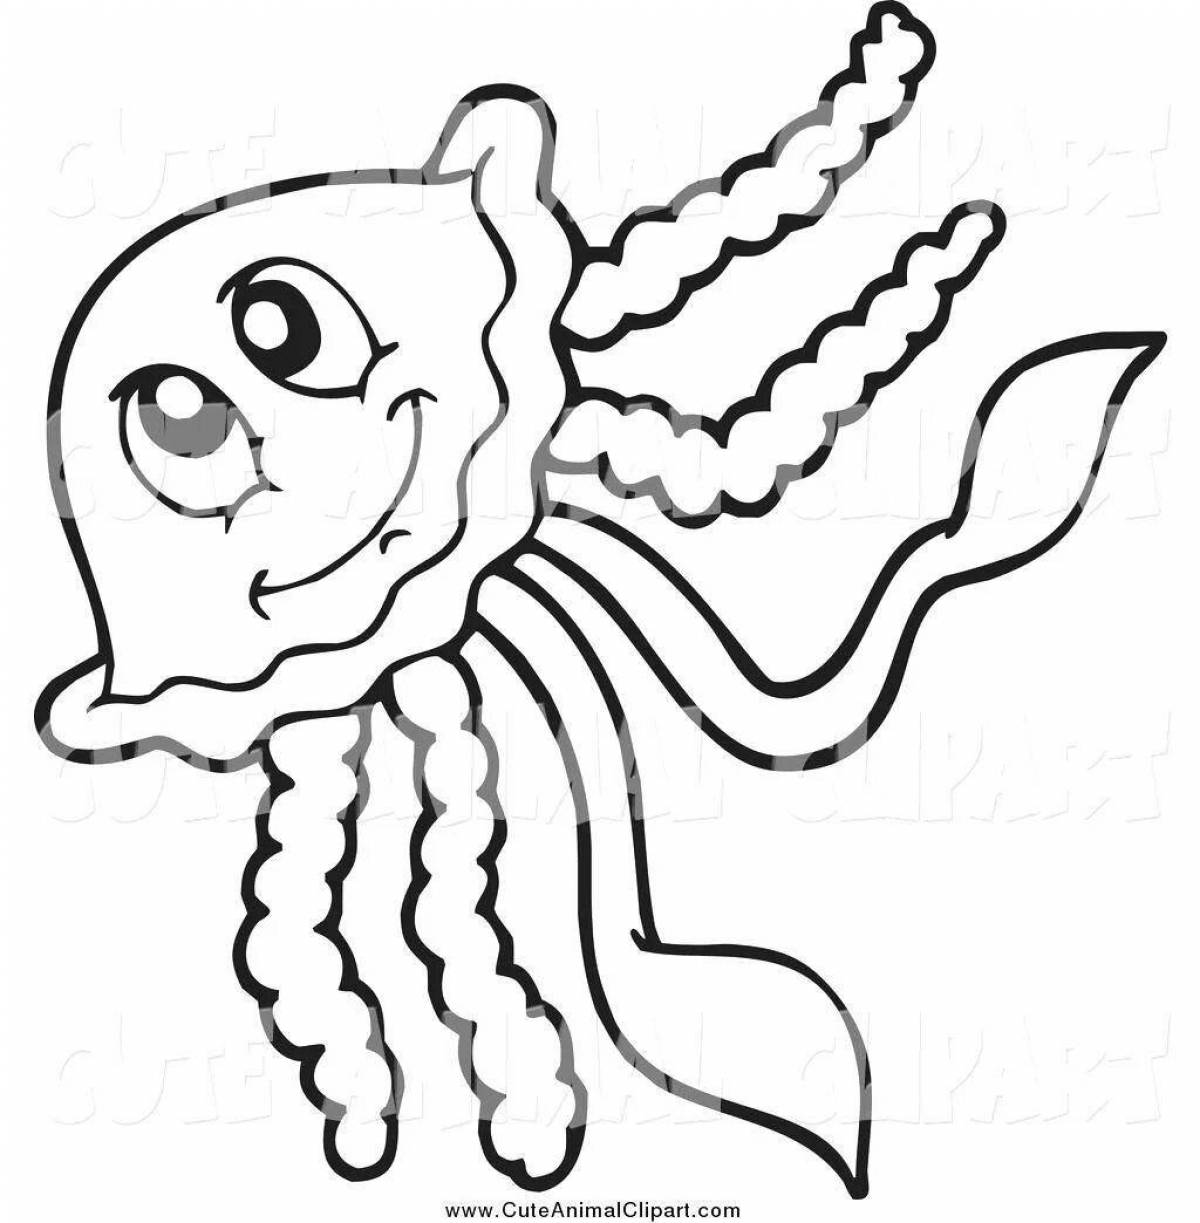 Humorous squid coloring book for kids